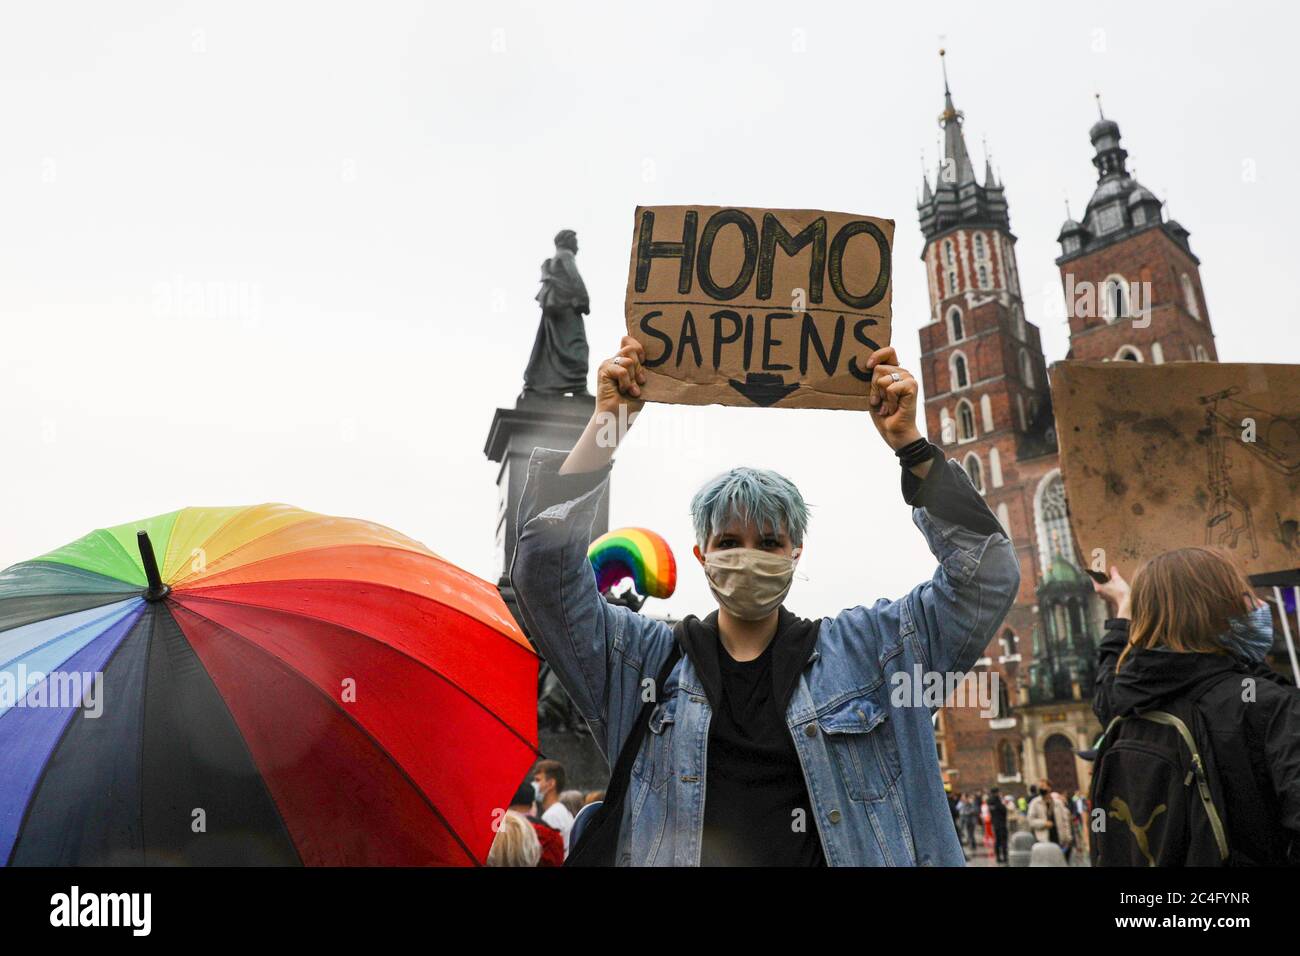 Protester holding a placard saying 'Homo Sapiens' during the counter-demonstration.In support of current President of Poland, Andrzej Duda who is applying for presidential re-elections to be held on 28 June, a political rally was held. The rally was accompanied by his stable electorate seniors and conservative small town dwellers. A counter-protest was held against Duda's homophobic statements. Stock Photo